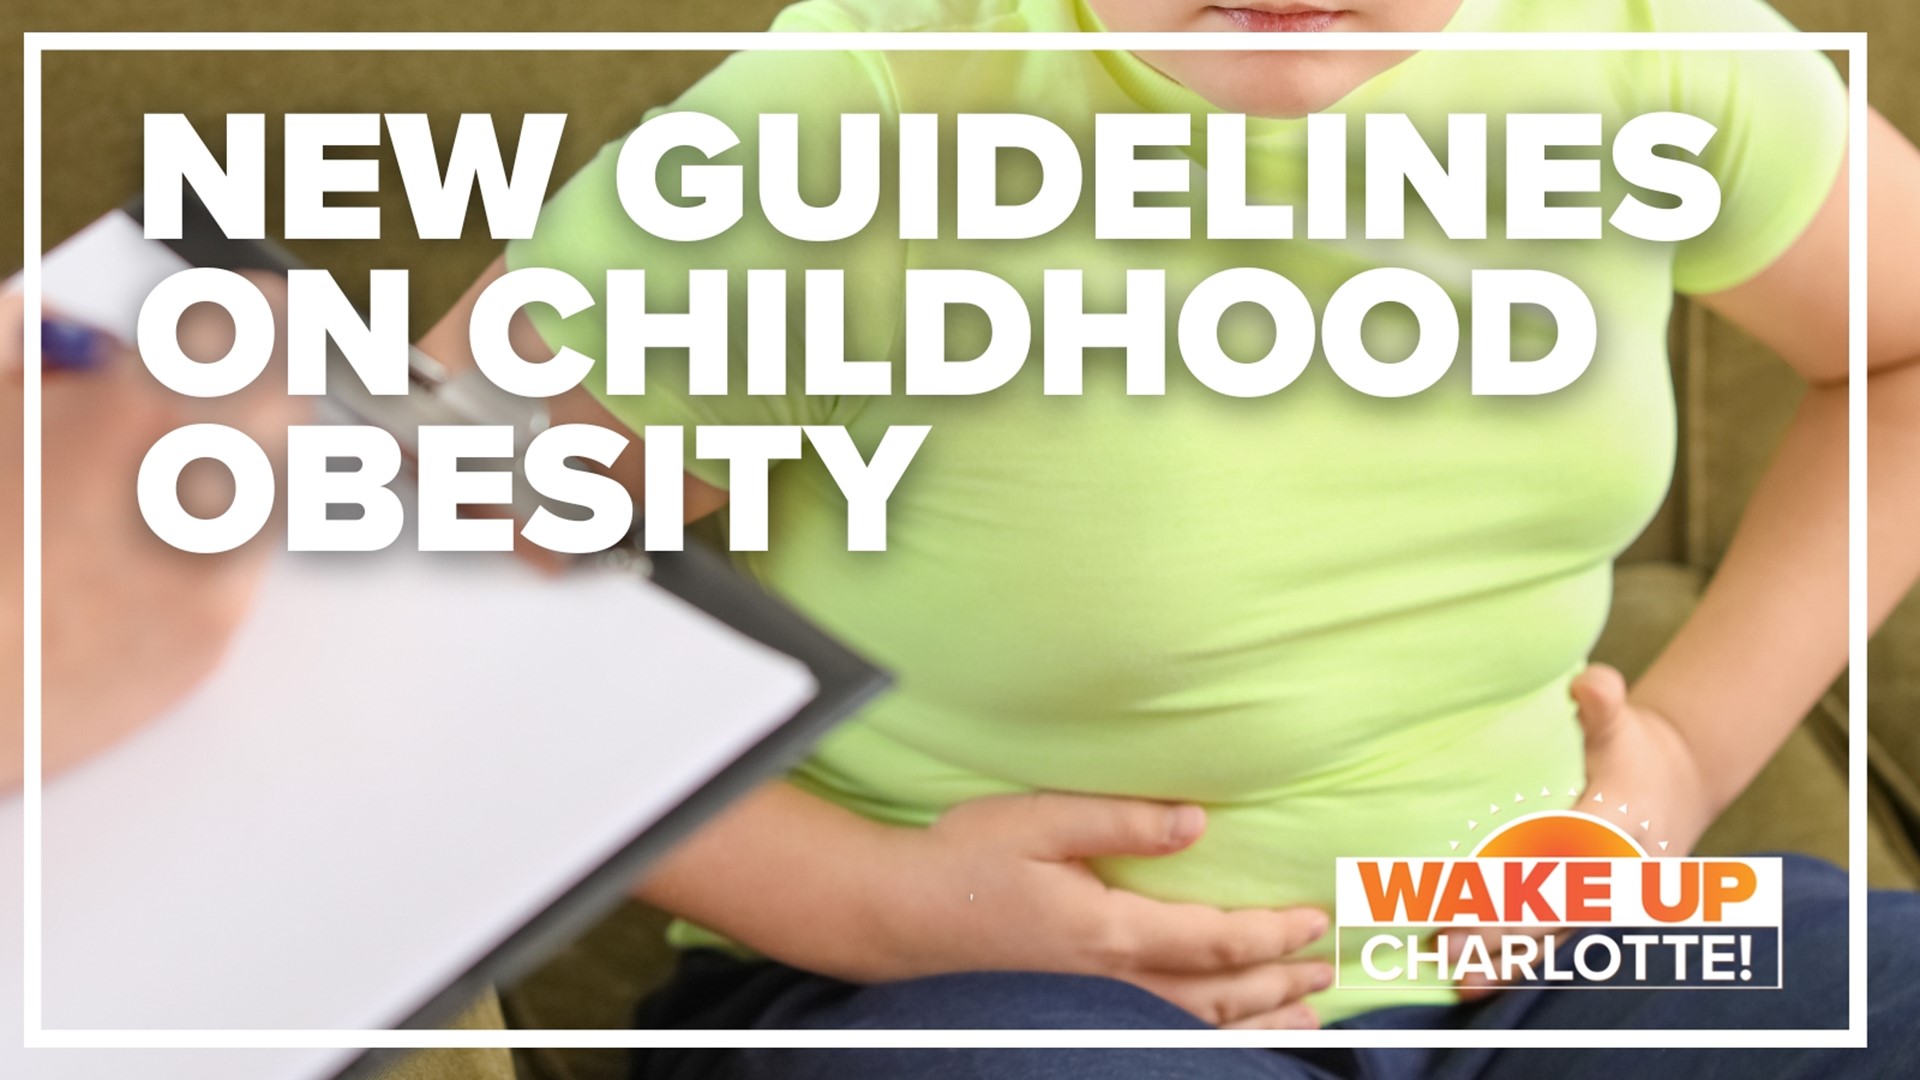 Johnson said before the guidelines, there wasn't a set structure to deal with childhood obesity.